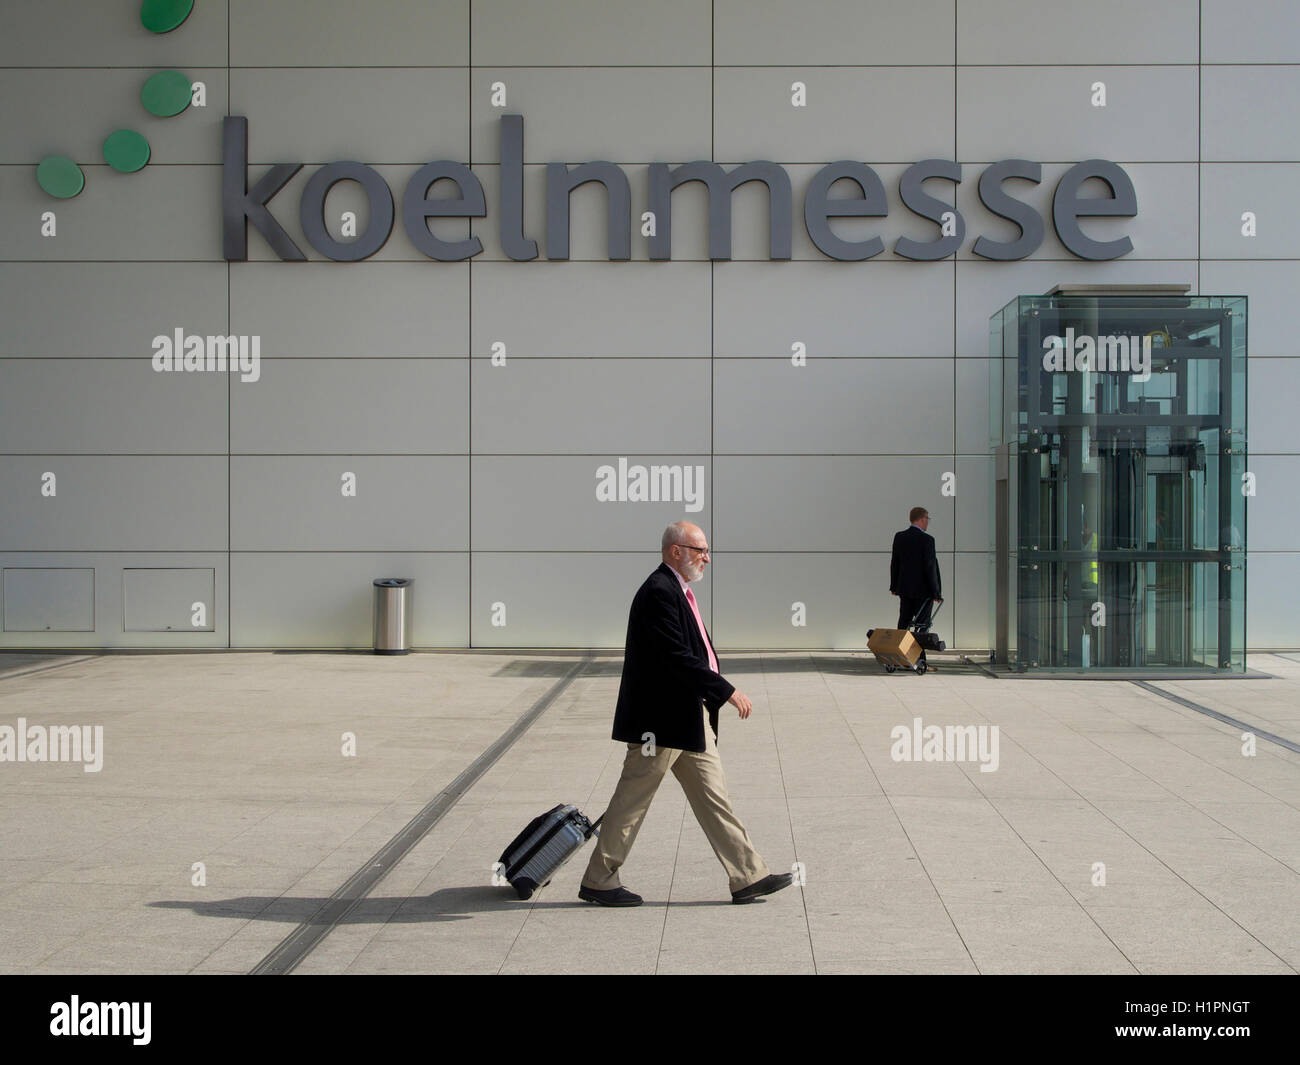 Koeln Messe entrance name sign with people in Cologne, Germany Stock Photo